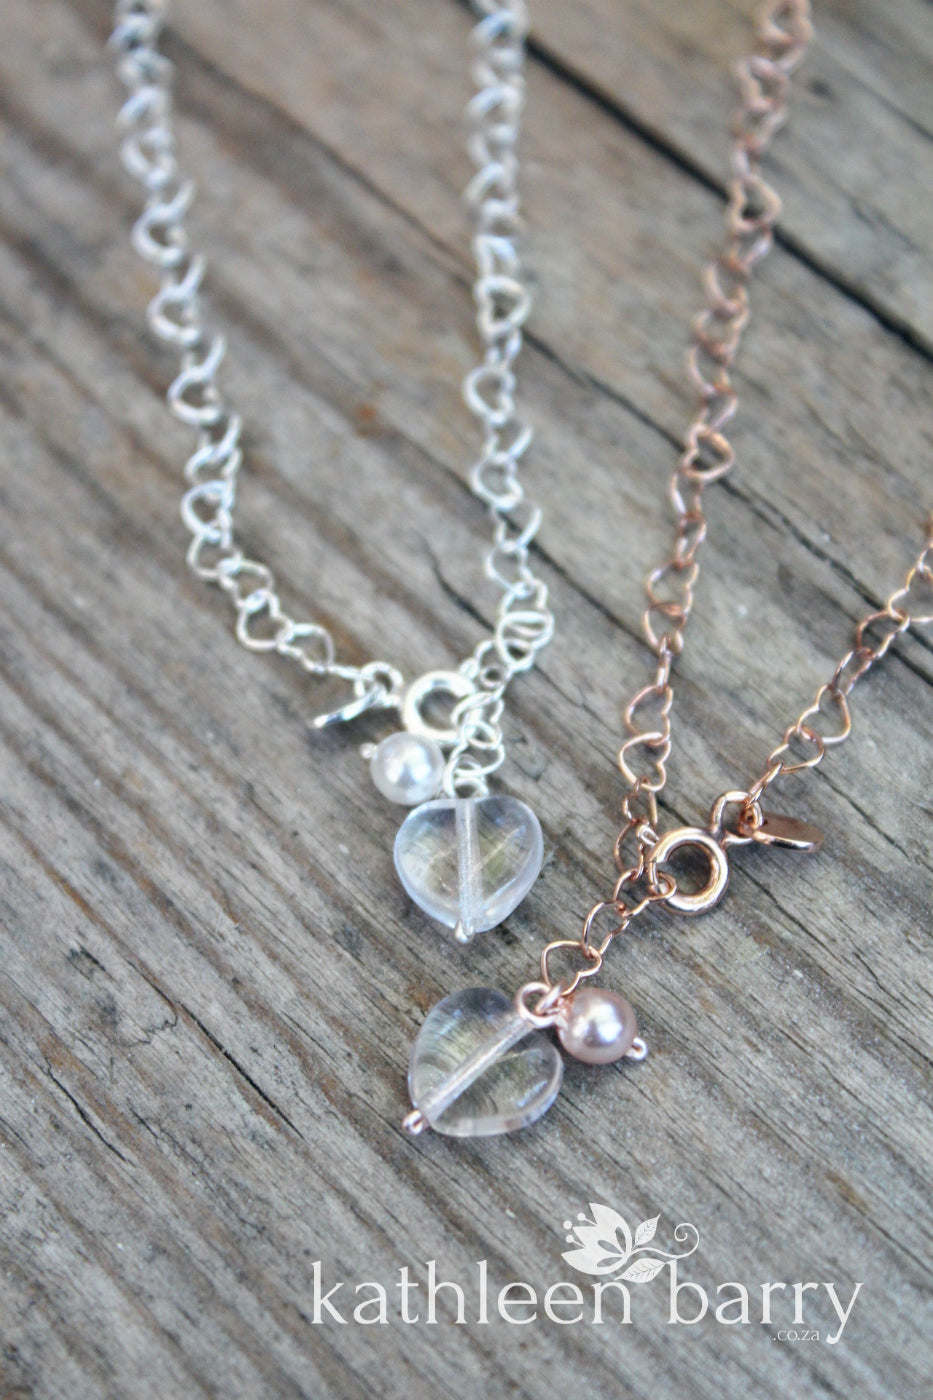 Heart chain bracelet, Sterling silver or Rose gold plated over sterling silver - Limited stock